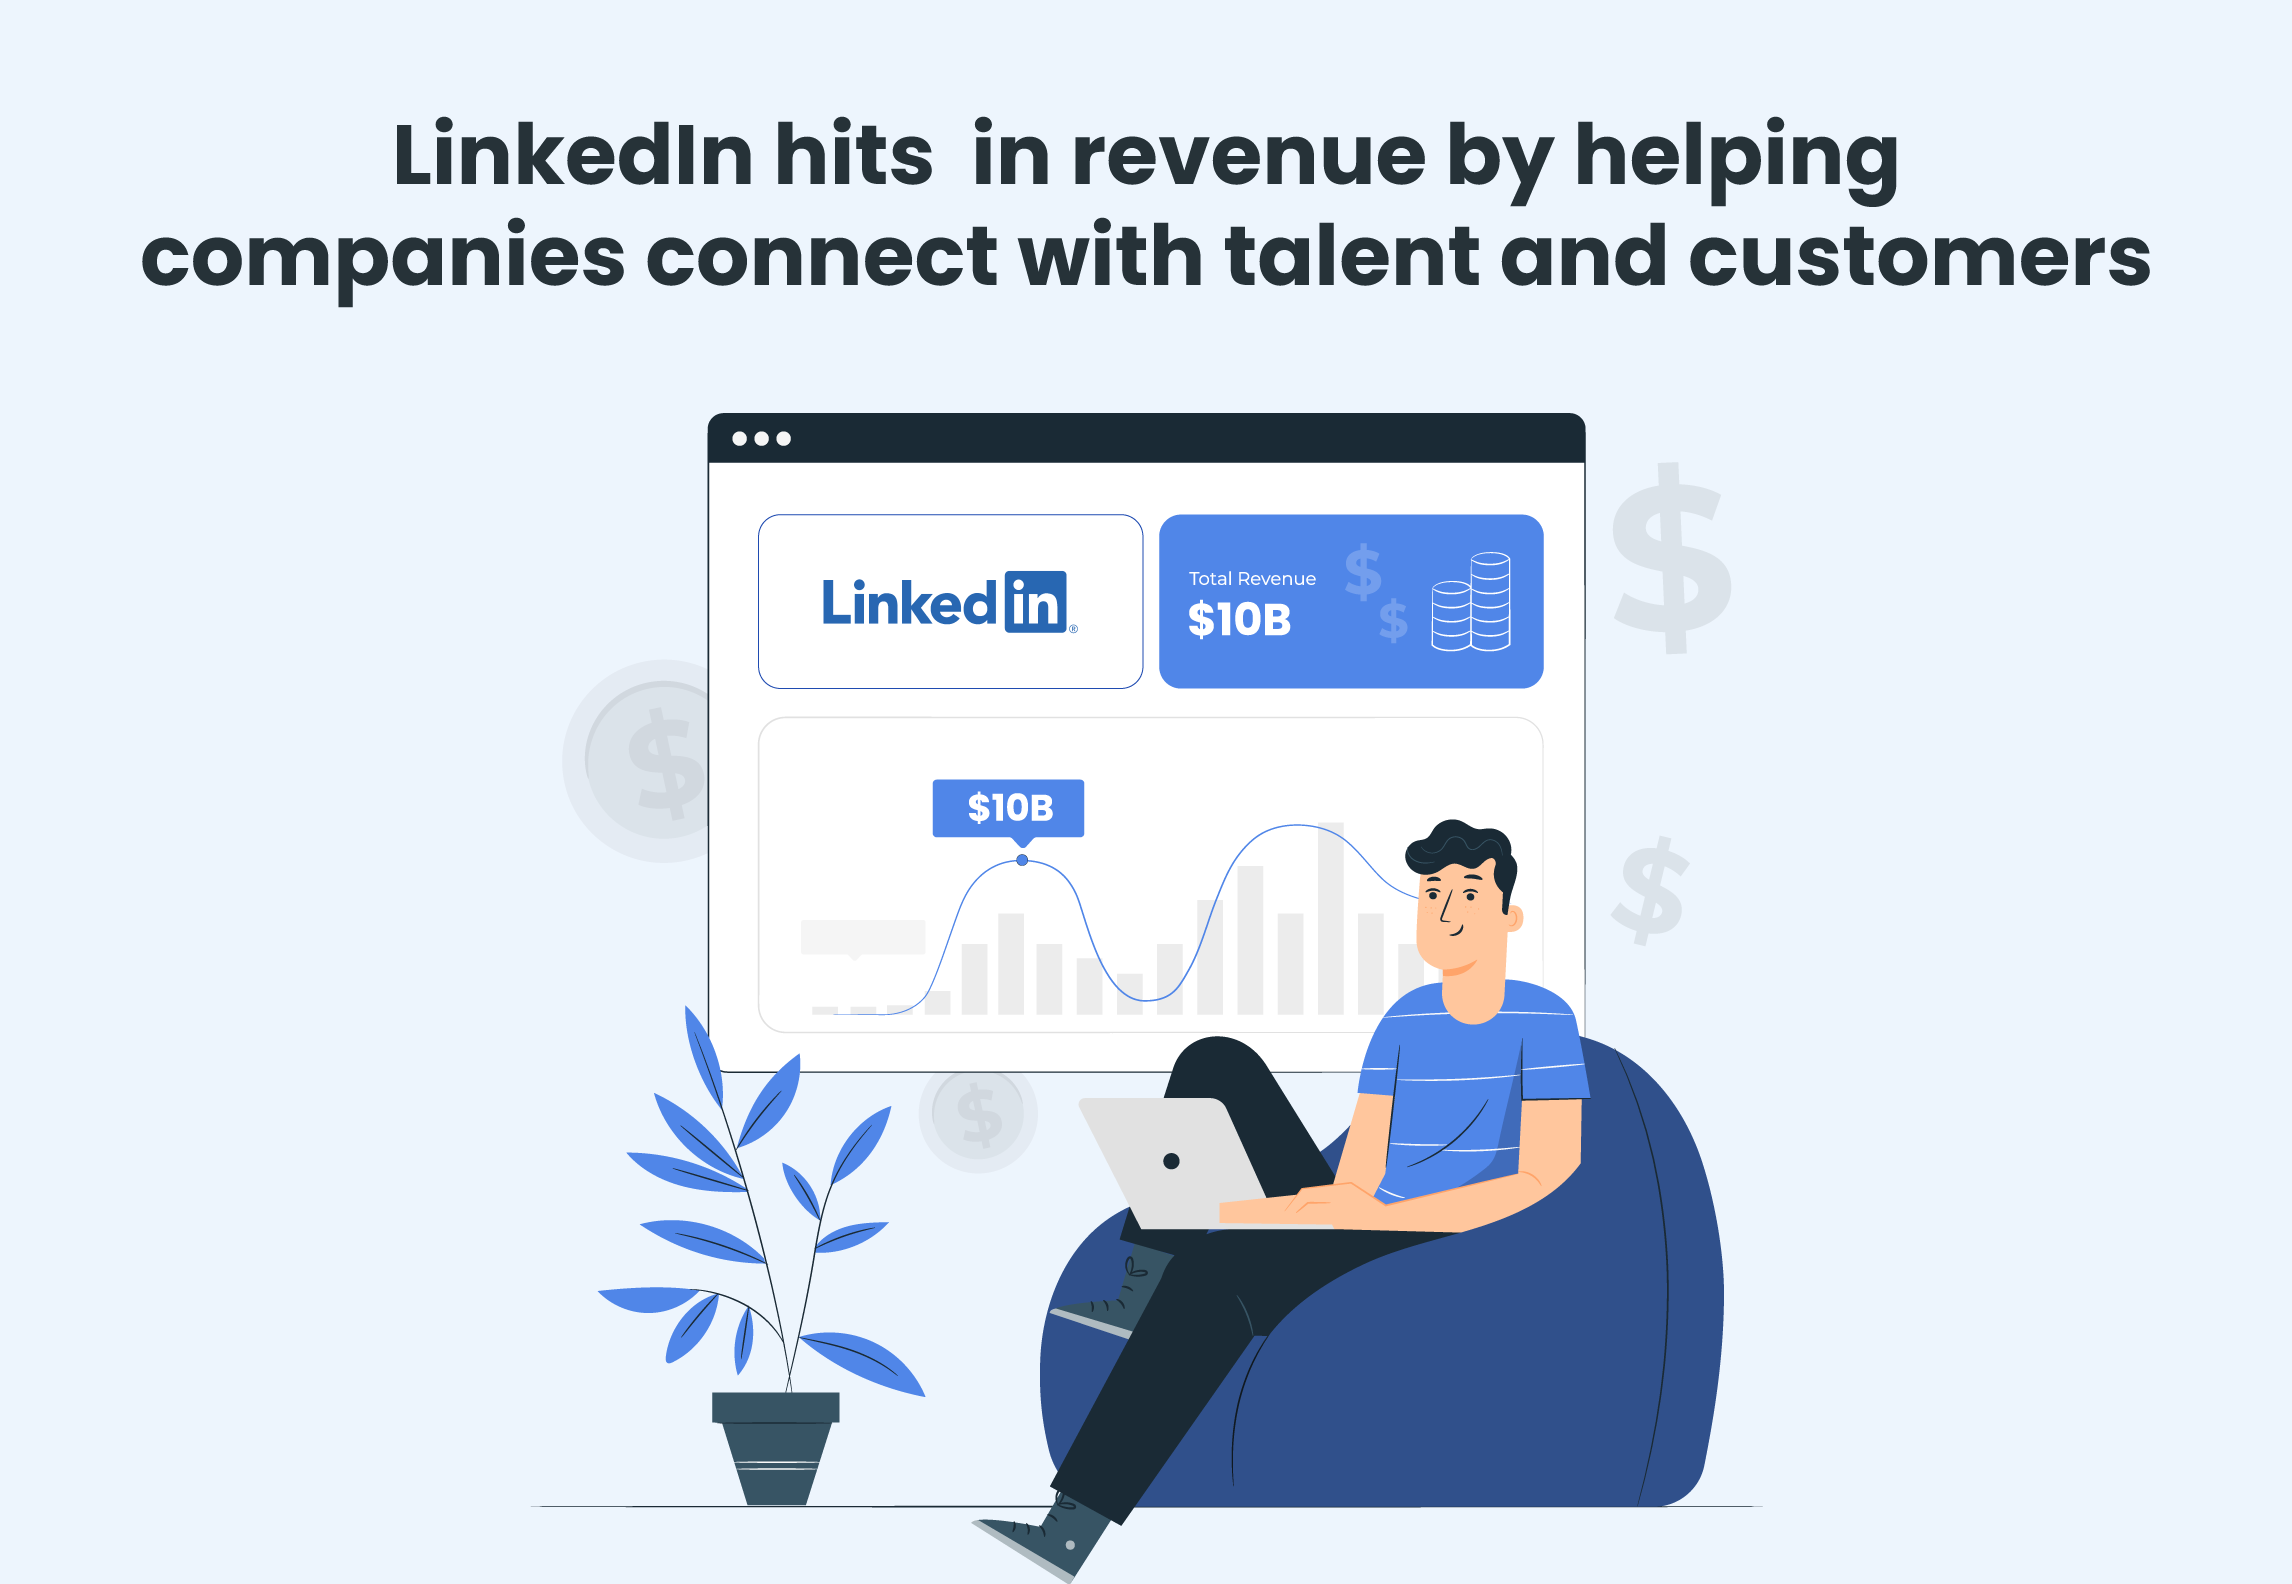 LinkedIn hits $10B in revenue by helping companies connect with talent and customers.